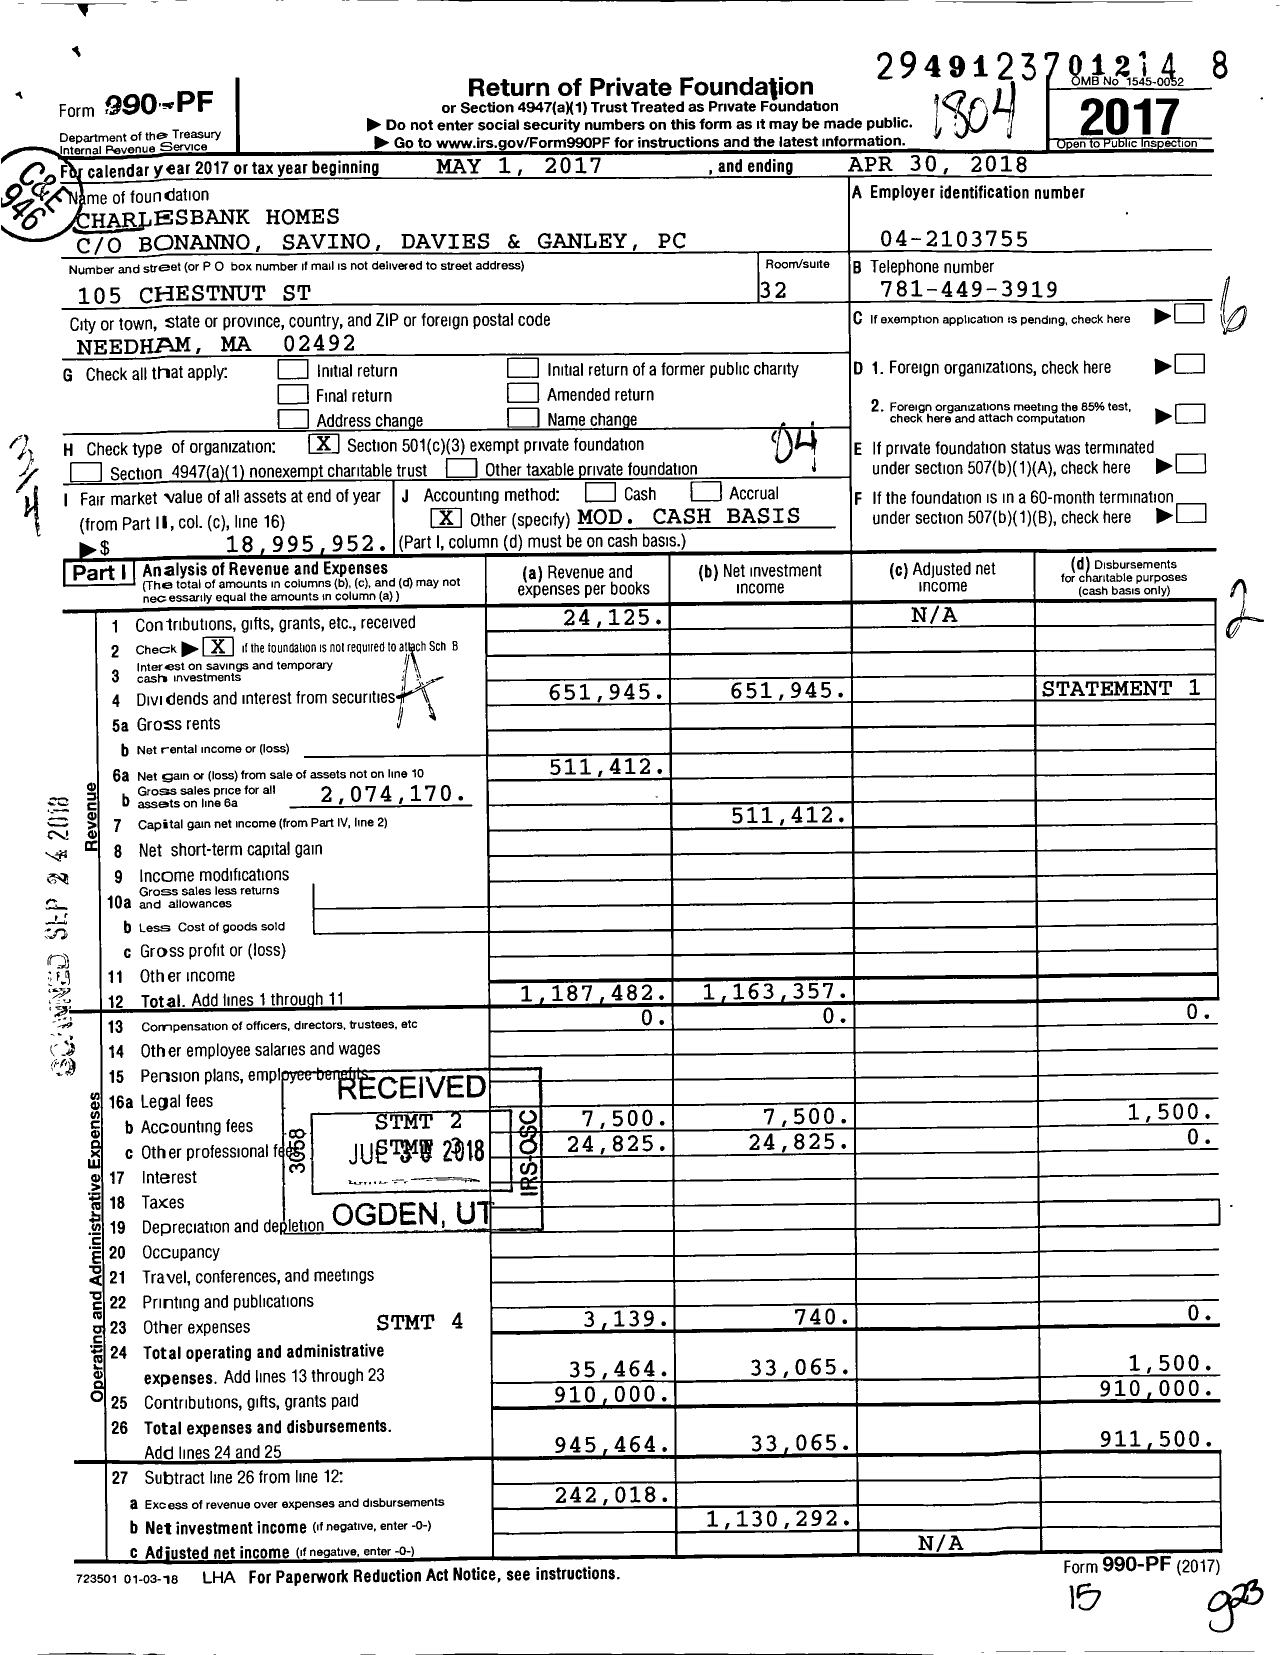 Image of first page of 2017 Form 990PF for Charlesbank Homes Foundation